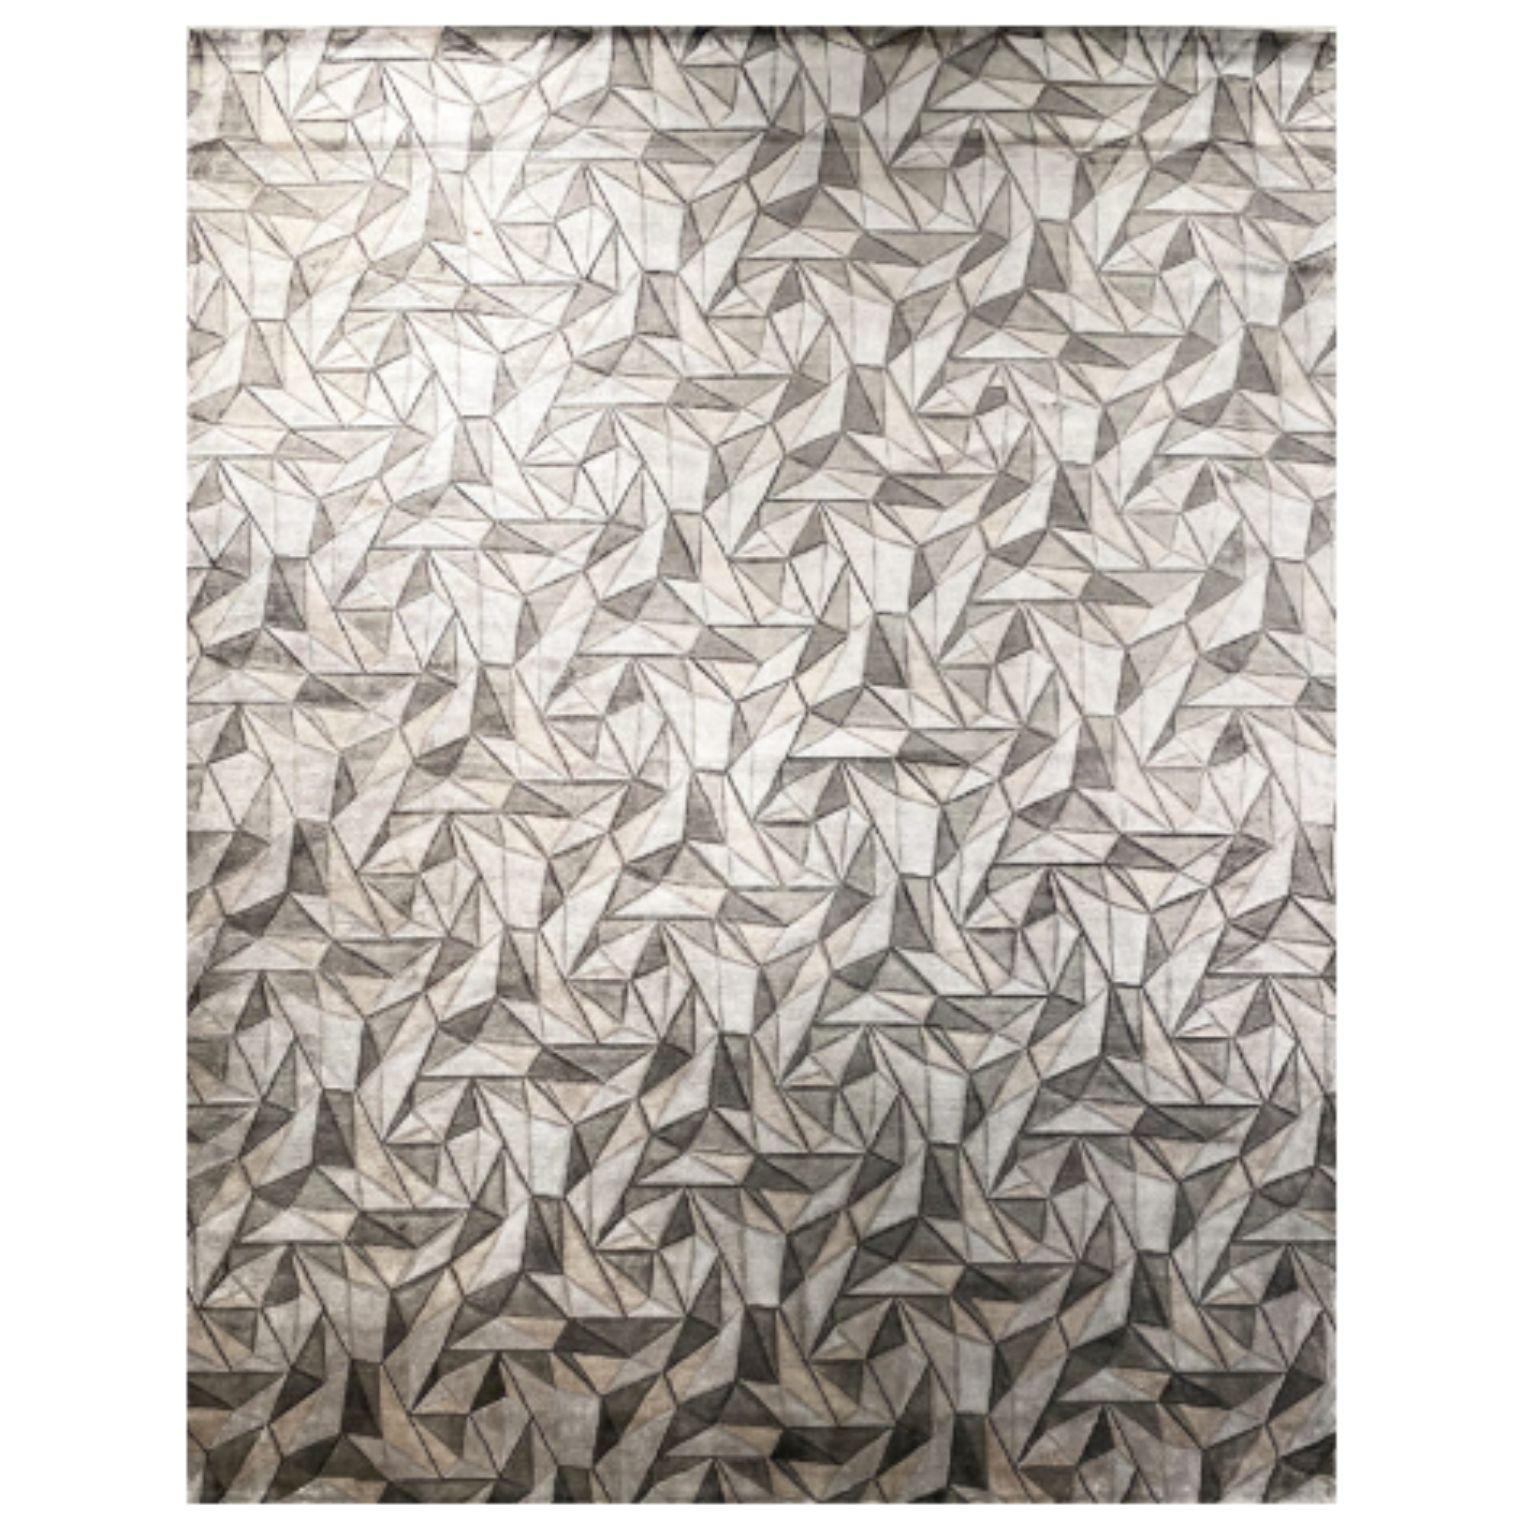 RICHMOND 200 rug by Illulian
Dimensions: D300 x H200 cm 
Materials: Silk 100%
Variations available and prices may vary according to materials and sizes.

Illulian, historic and prestigious rug company brand, internationally renowned in the